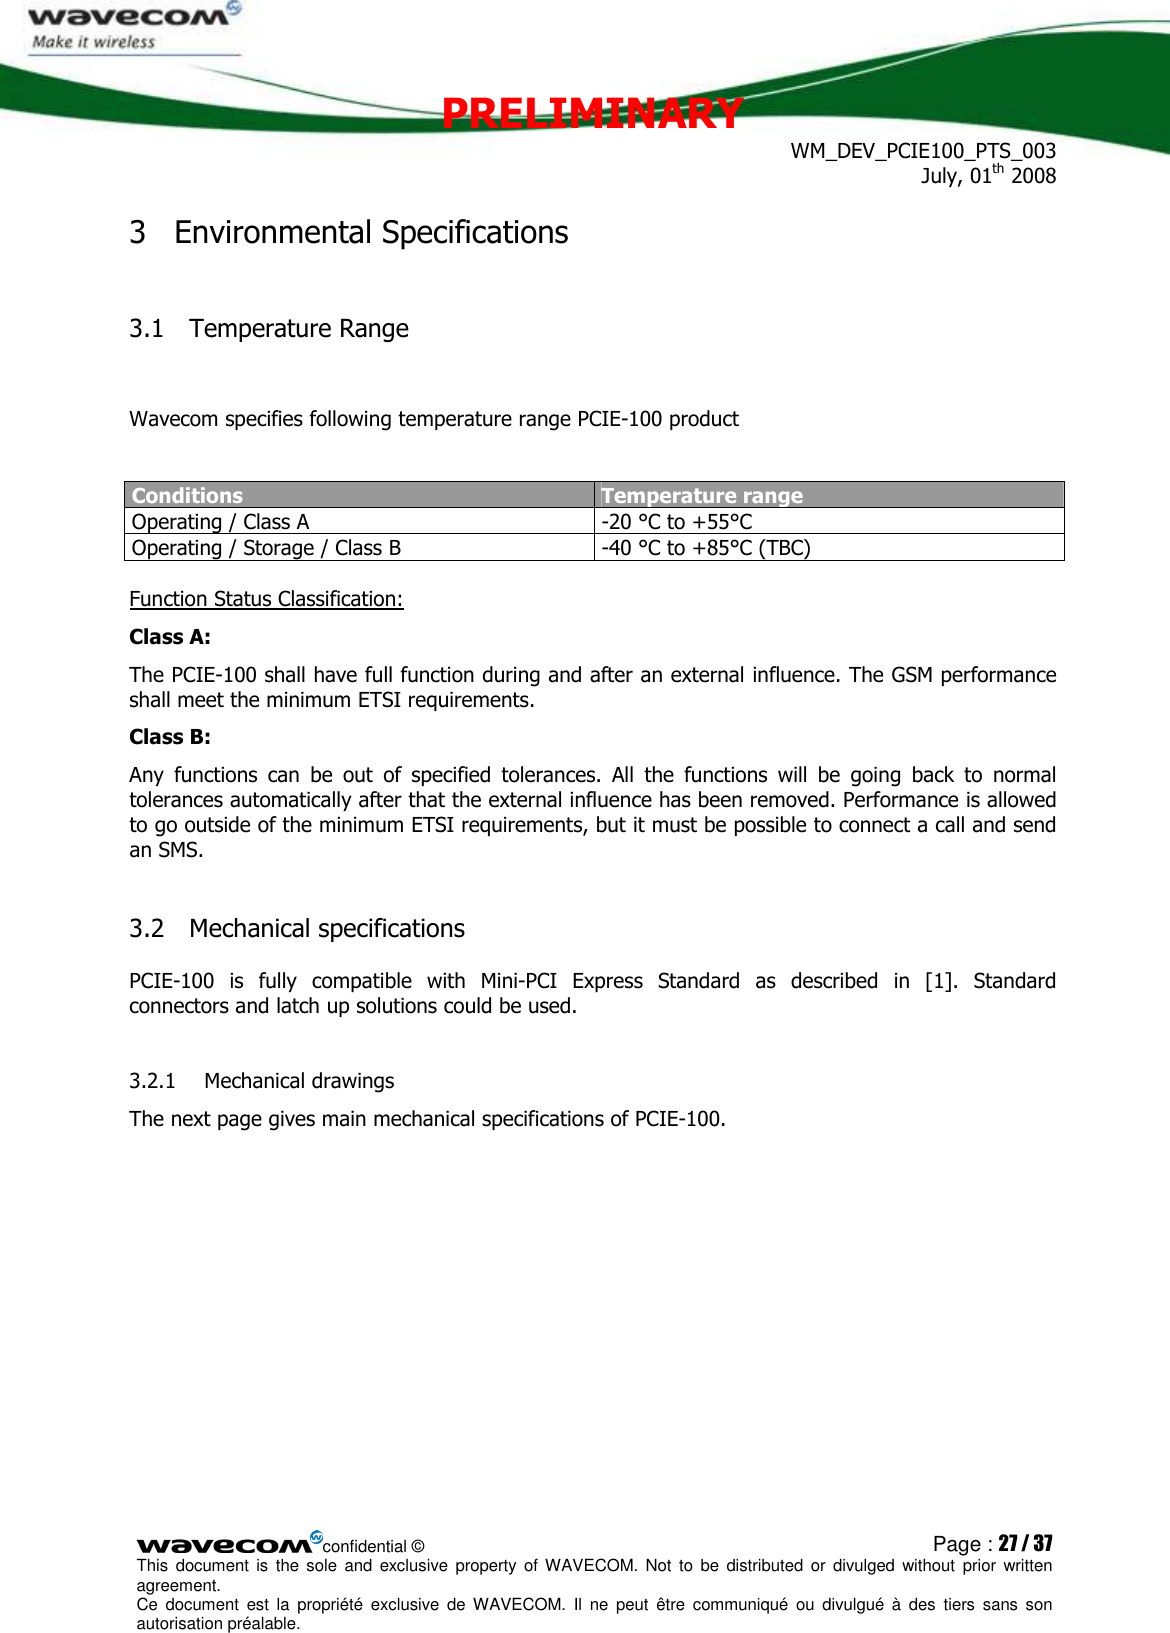 PRELIMINARY WM_DEV_PCIE100_PTS_003 July, 01th 2008  confidential © Page : 27 / 37 This  document  is  the  sole  and  exclusive property  of  WAVECOM.  Not  to  be  distributed  or  divulged  without  prior written agreement.  Ce  document  est  la  propriété  exclusive  de  WAVECOM.  Il  ne  peut  être  communiqué  ou  divulgué à  des  tiers  sans  son autorisation préalable.  3 Environmental Specifications 3.1 Temperature Range  Wavecom specifies following temperature range PCIE-100 product  Conditions Temperature range Operating / Class A  -20 °C to +55°C Operating / Storage / Class B   -40 °C to +85°C (TBC)  Function Status Classification: Class A:    The PCIE-100 shall have full function during and after an external influence. The GSM performance shall meet the minimum ETSI requirements. Class B:    Any  functions  can  be  out  of  specified  tolerances.  All  the  functions  will  be  going  back  to  normal tolerances automatically after that the external influence has been removed. Performance is allowed to go outside of the minimum ETSI requirements, but it must be possible to connect a call and send an SMS.  3.2 Mechanical specifications PCIE-100  is  fully  compatible  with  Mini-PCI  Express  Standard  as  described  in  [1].  Standard connectors and latch up solutions could be used.  3.2.1 Mechanical drawings The next page gives main mechanical specifications of PCIE-100.  